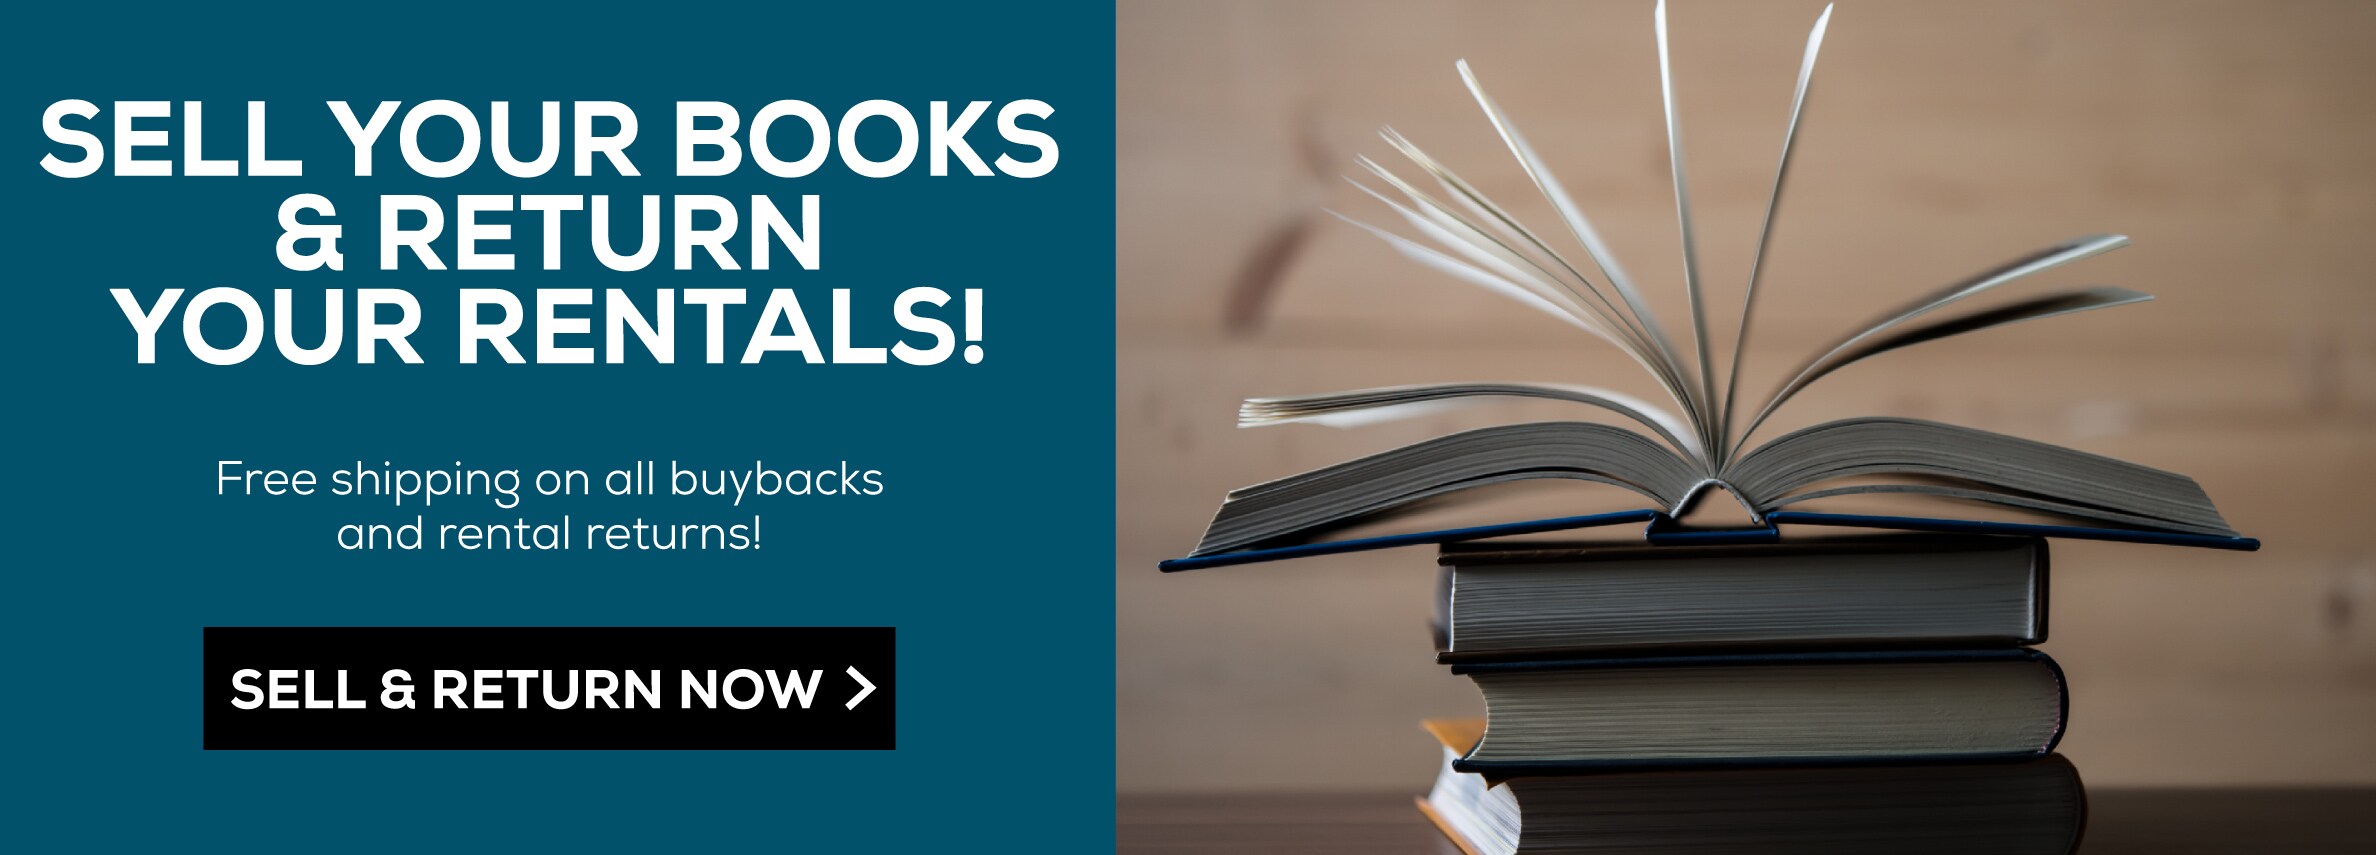 Sell Your Books & Return Your Rentals - Free shipping on all buybacks and rental returns! Sell & Return Now!